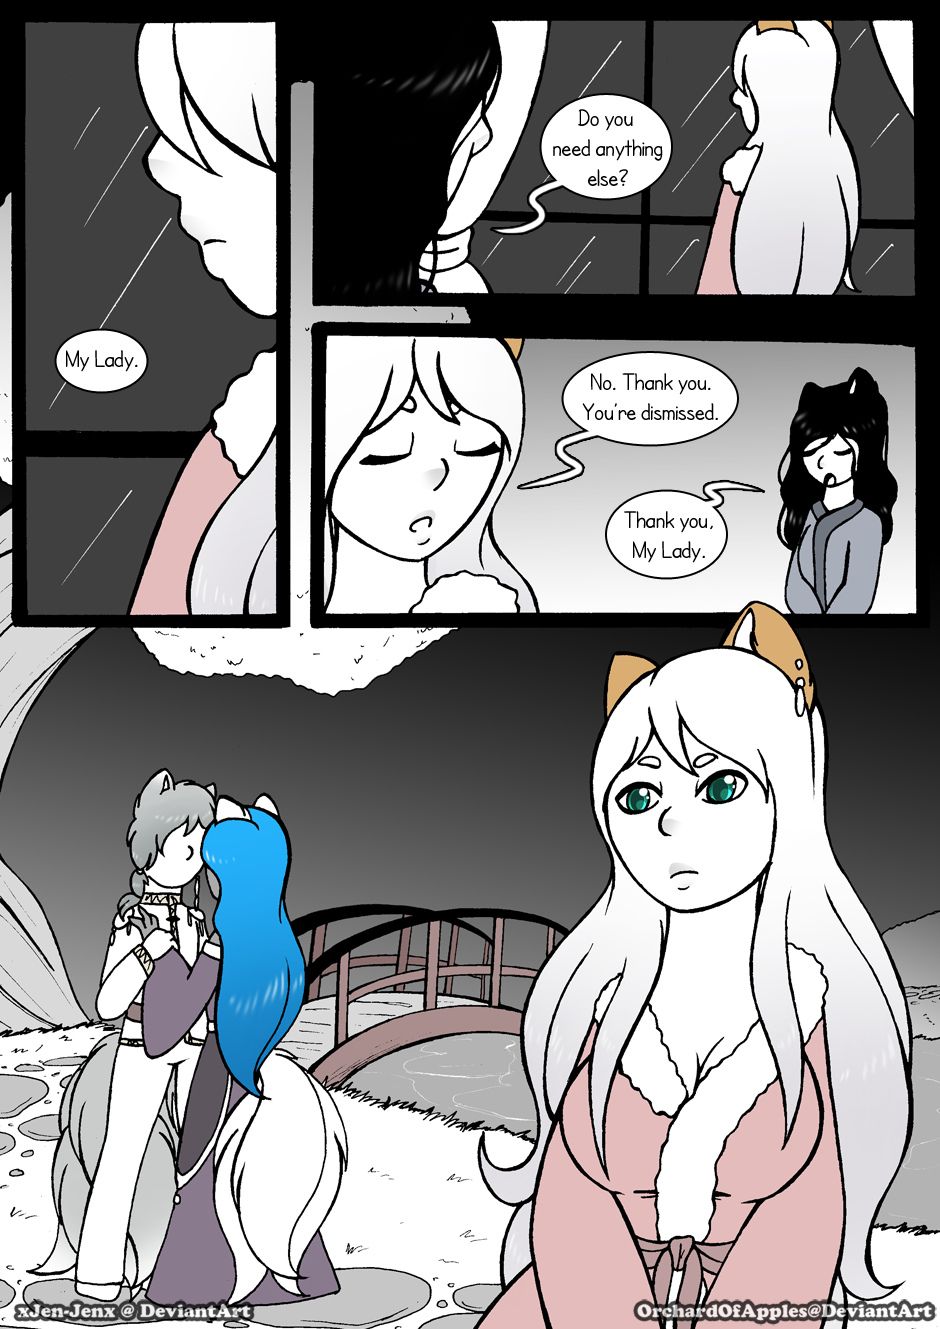 [Jeny-jen94] Between Kings and Queens [Ongoing] 203